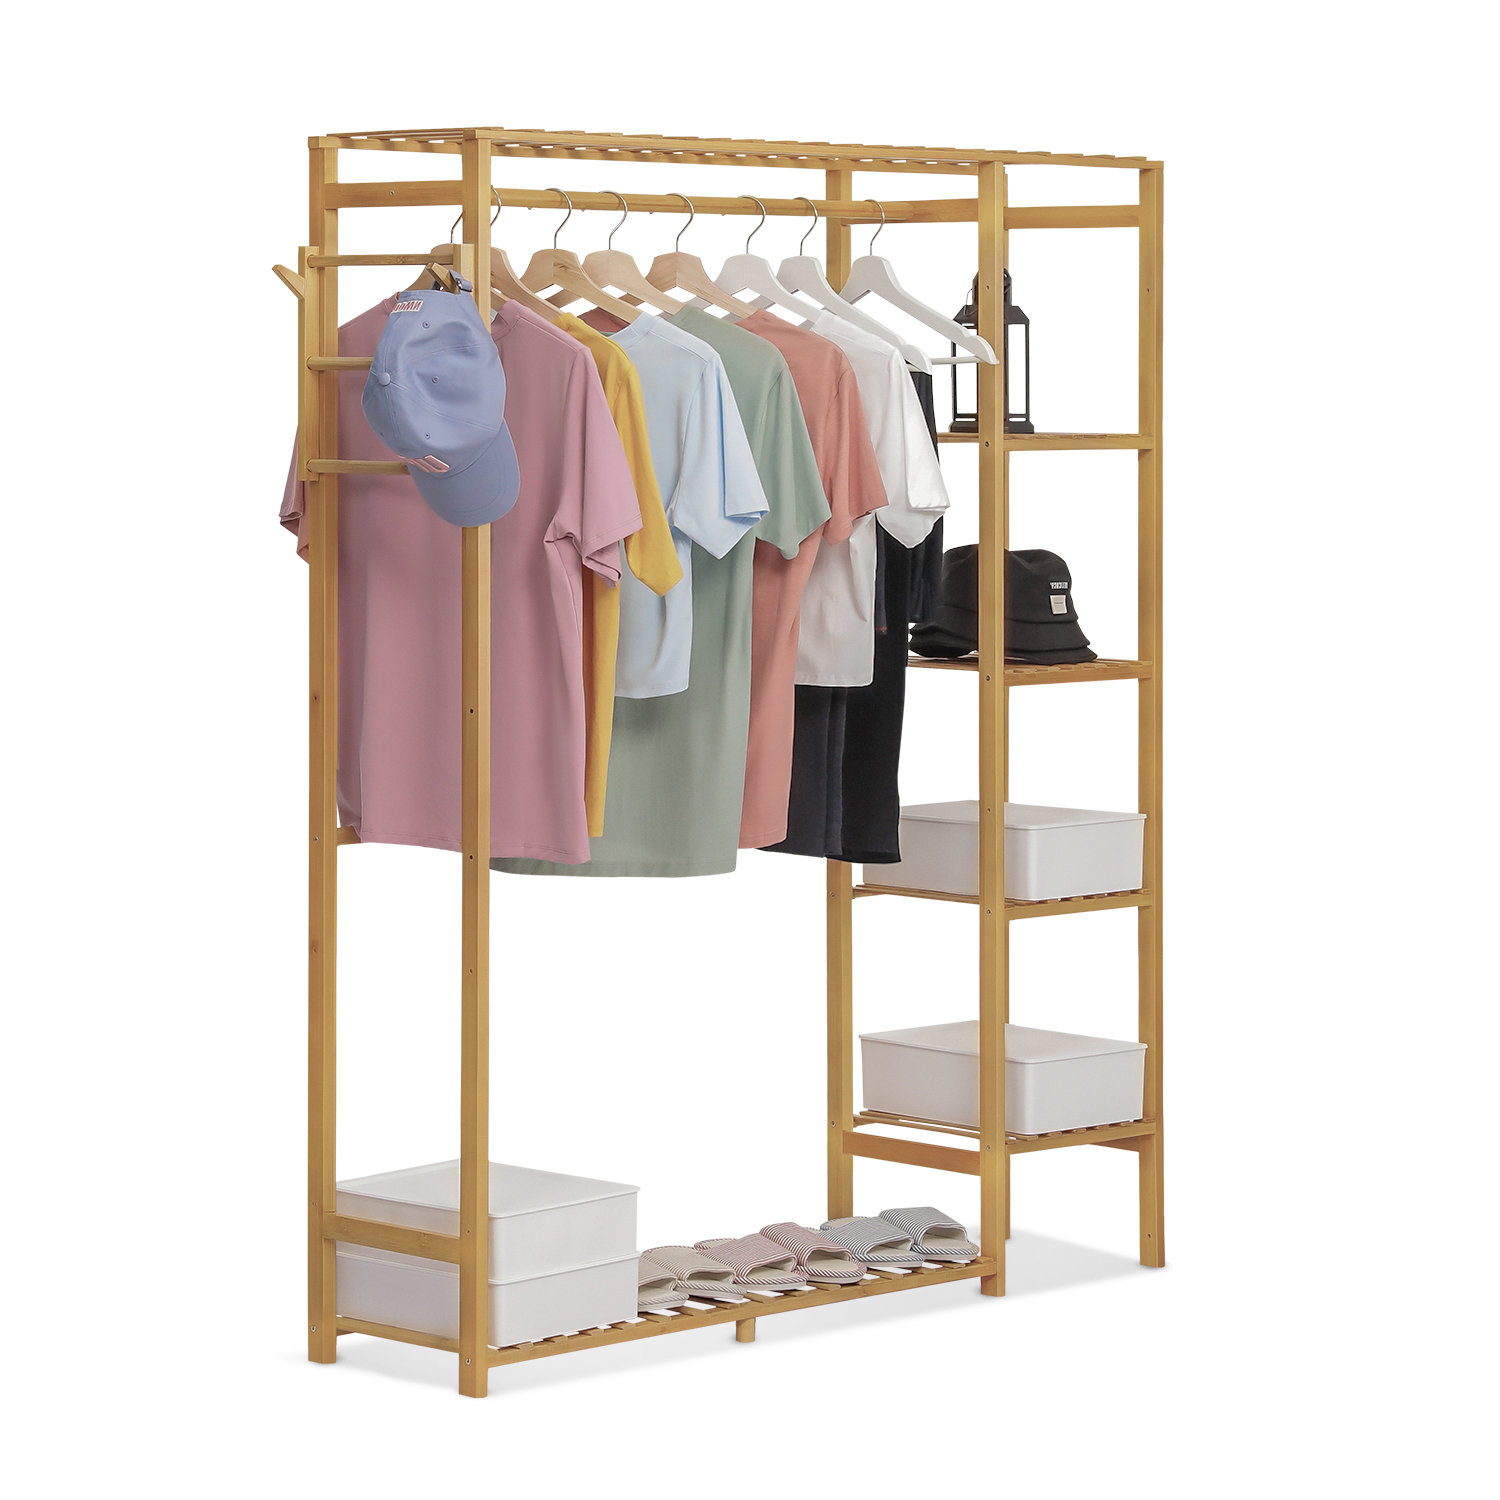 Pull Out Pants Rack Clearance - anuariocidob.org 1688948393